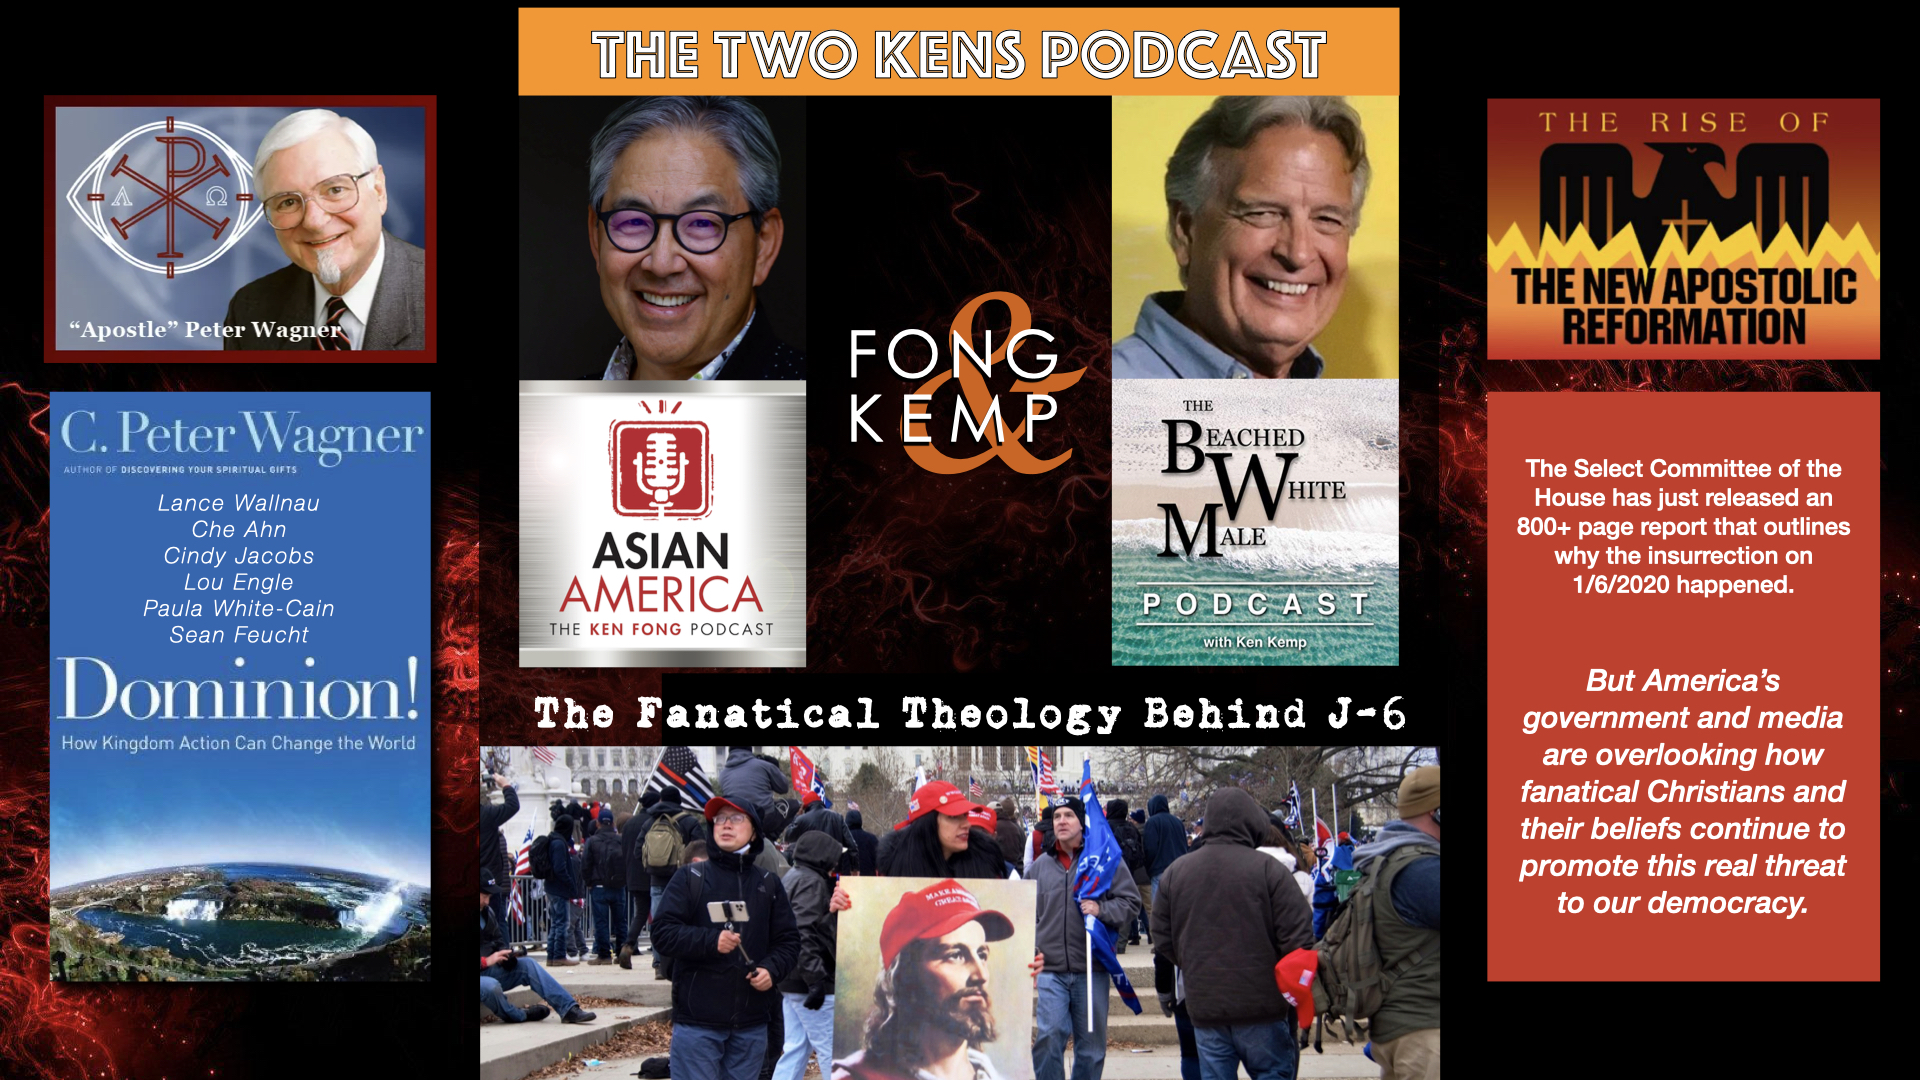 Ep 404: The Two Ken’s Podcast on the Evangelical Fanatics Who Fueled the J-6 Insurrection